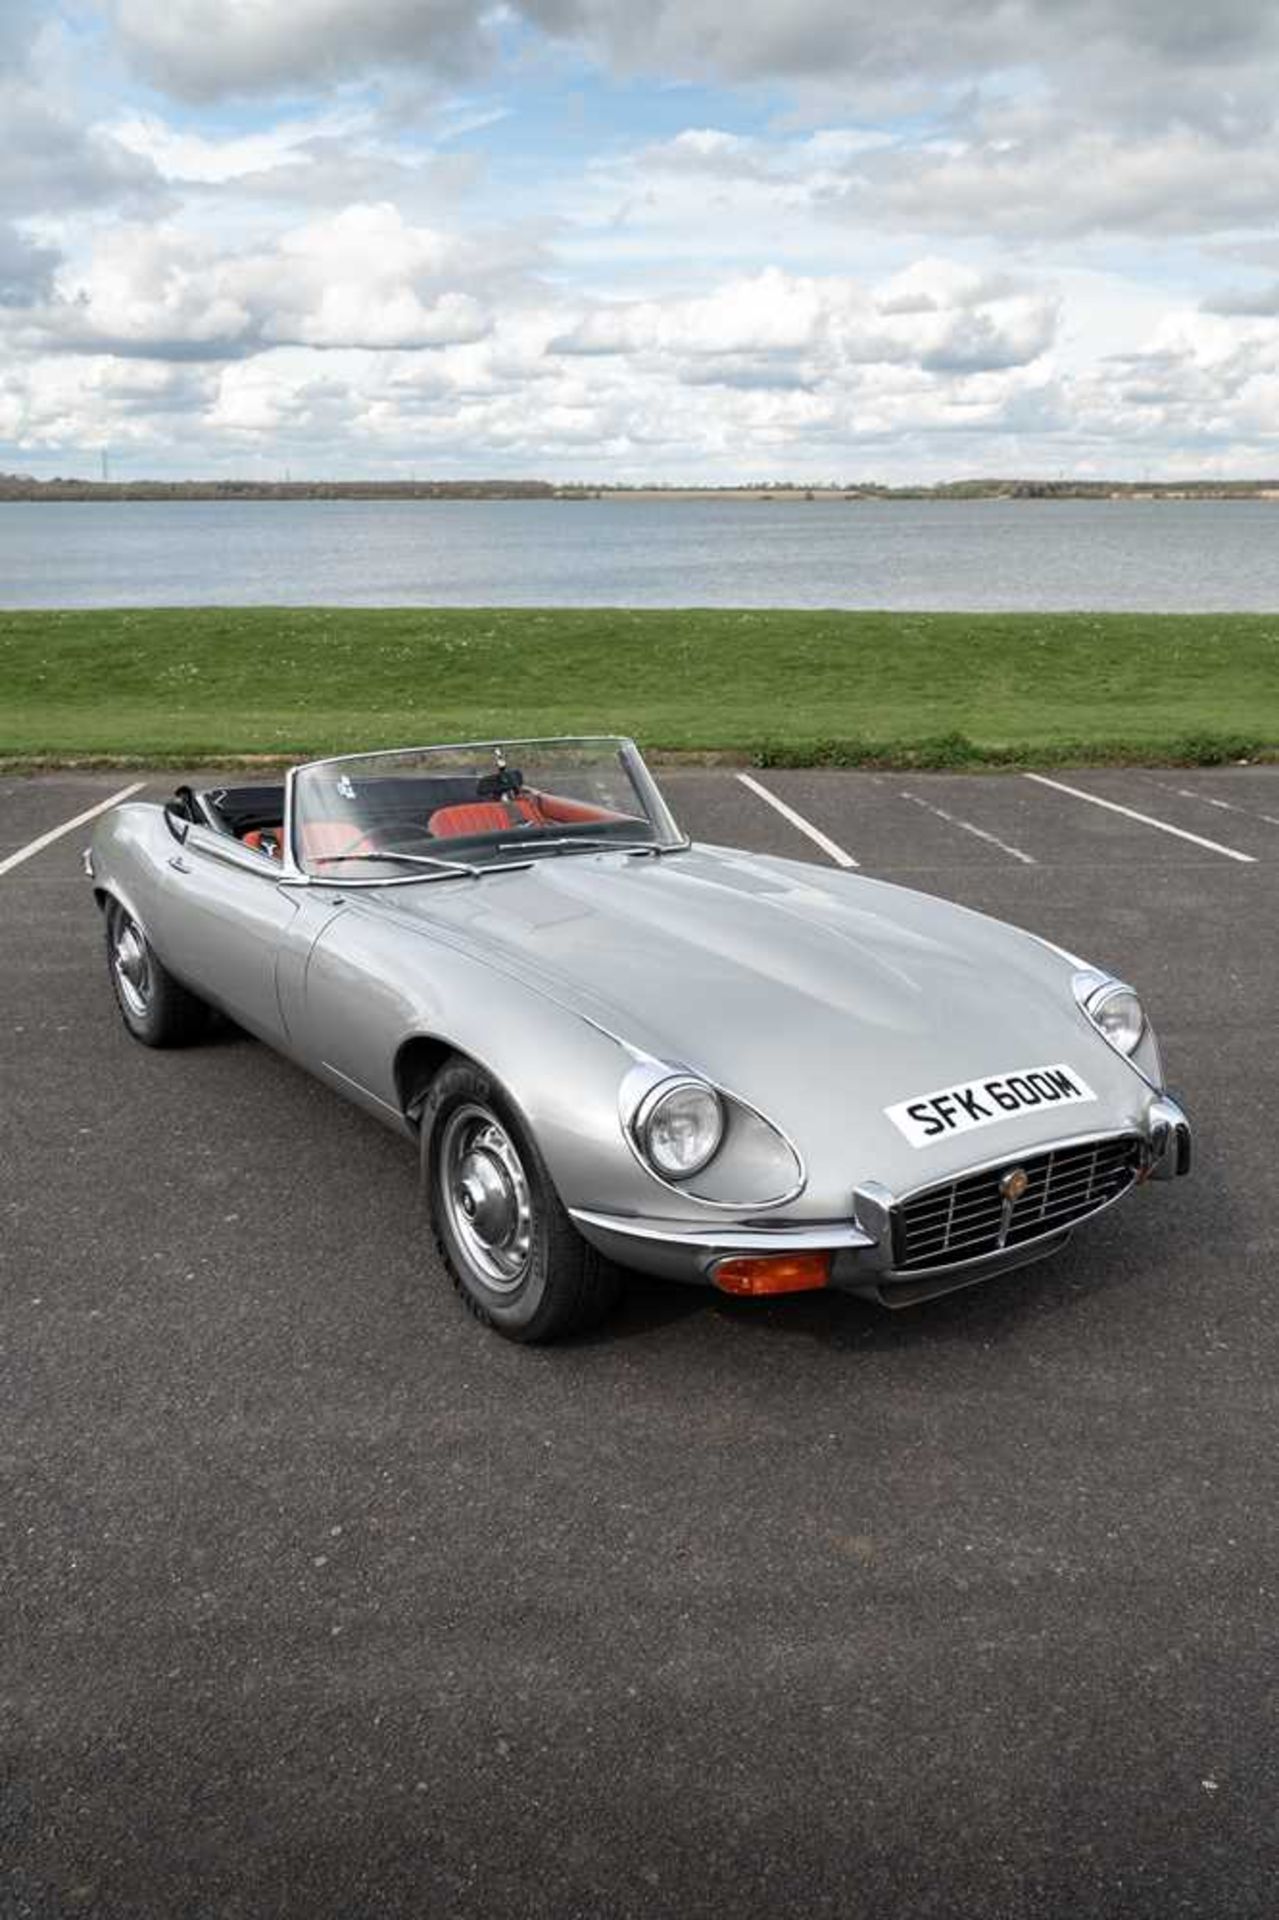 1974 Jaguar E-Type Series III V12 Roadster Only one family owner and 54,412 miles from new - Image 59 of 89